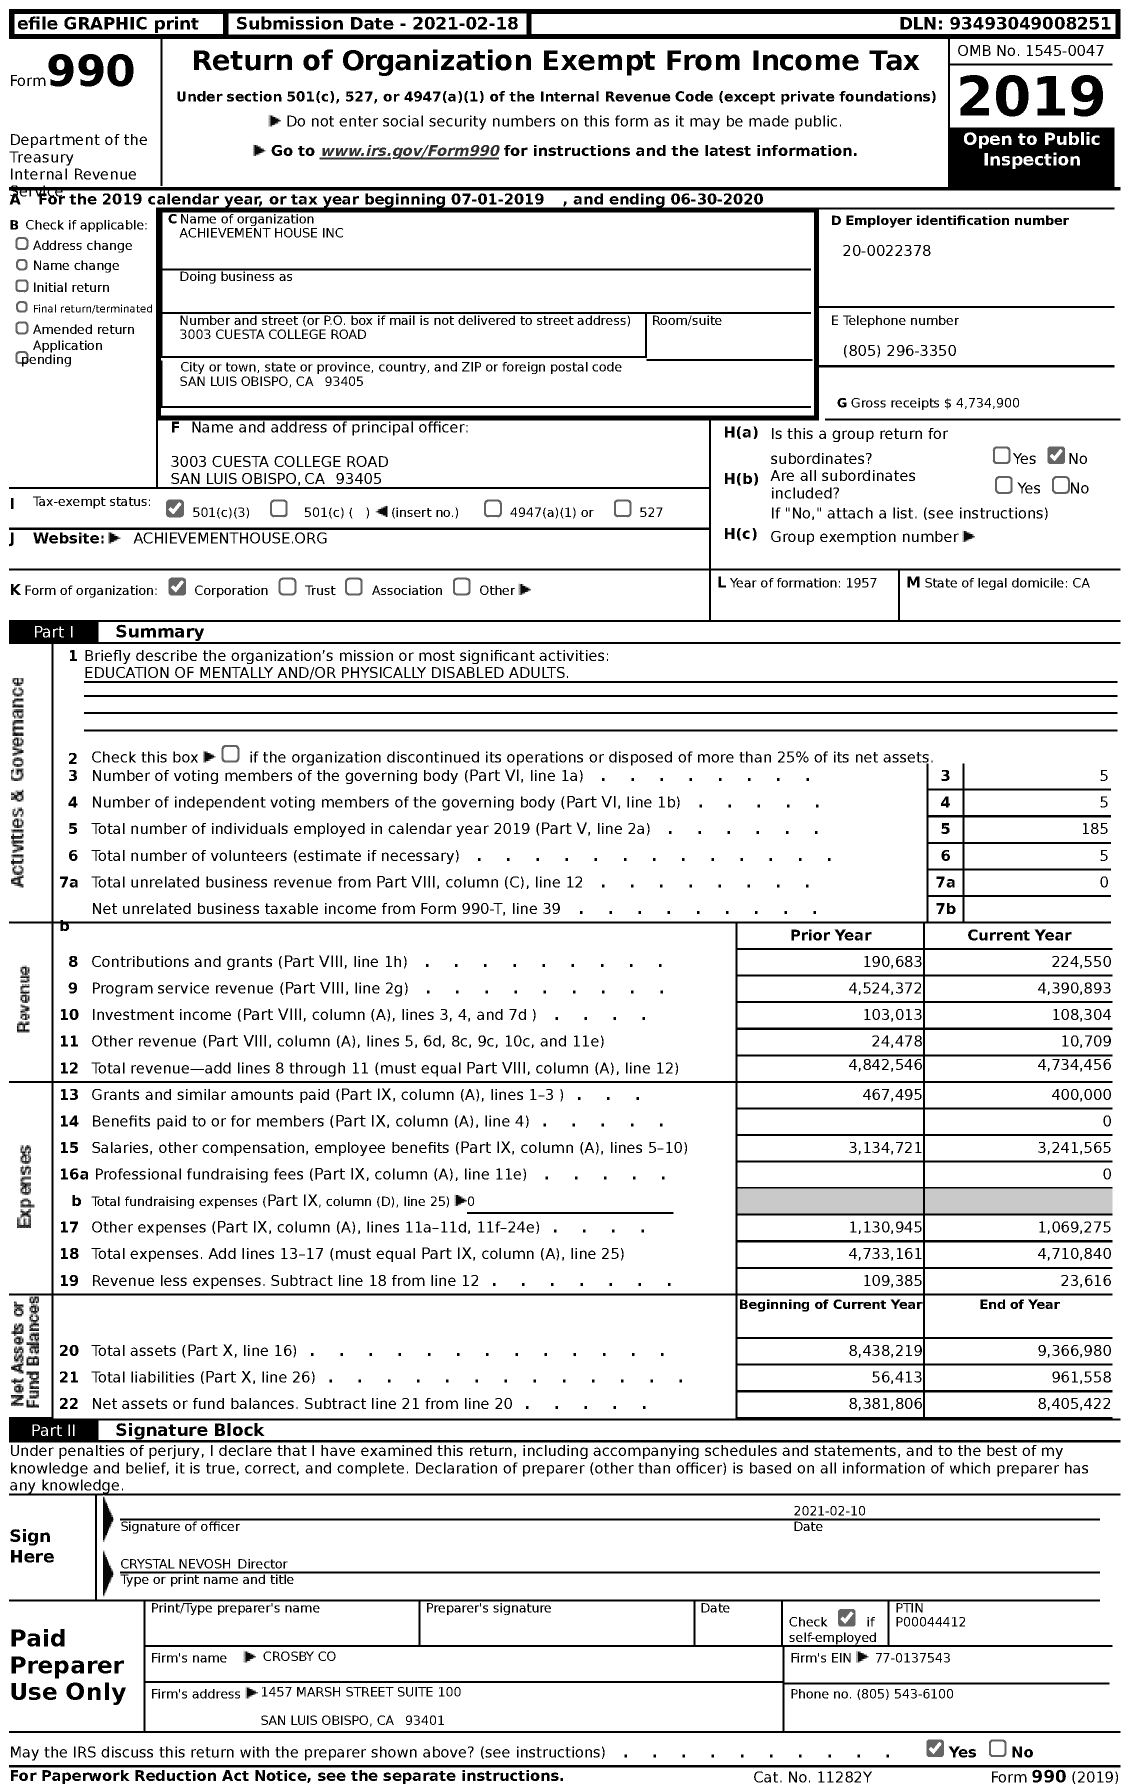 Image of first page of 2019 Form 990 for Achievement House Incorporated (AHI)